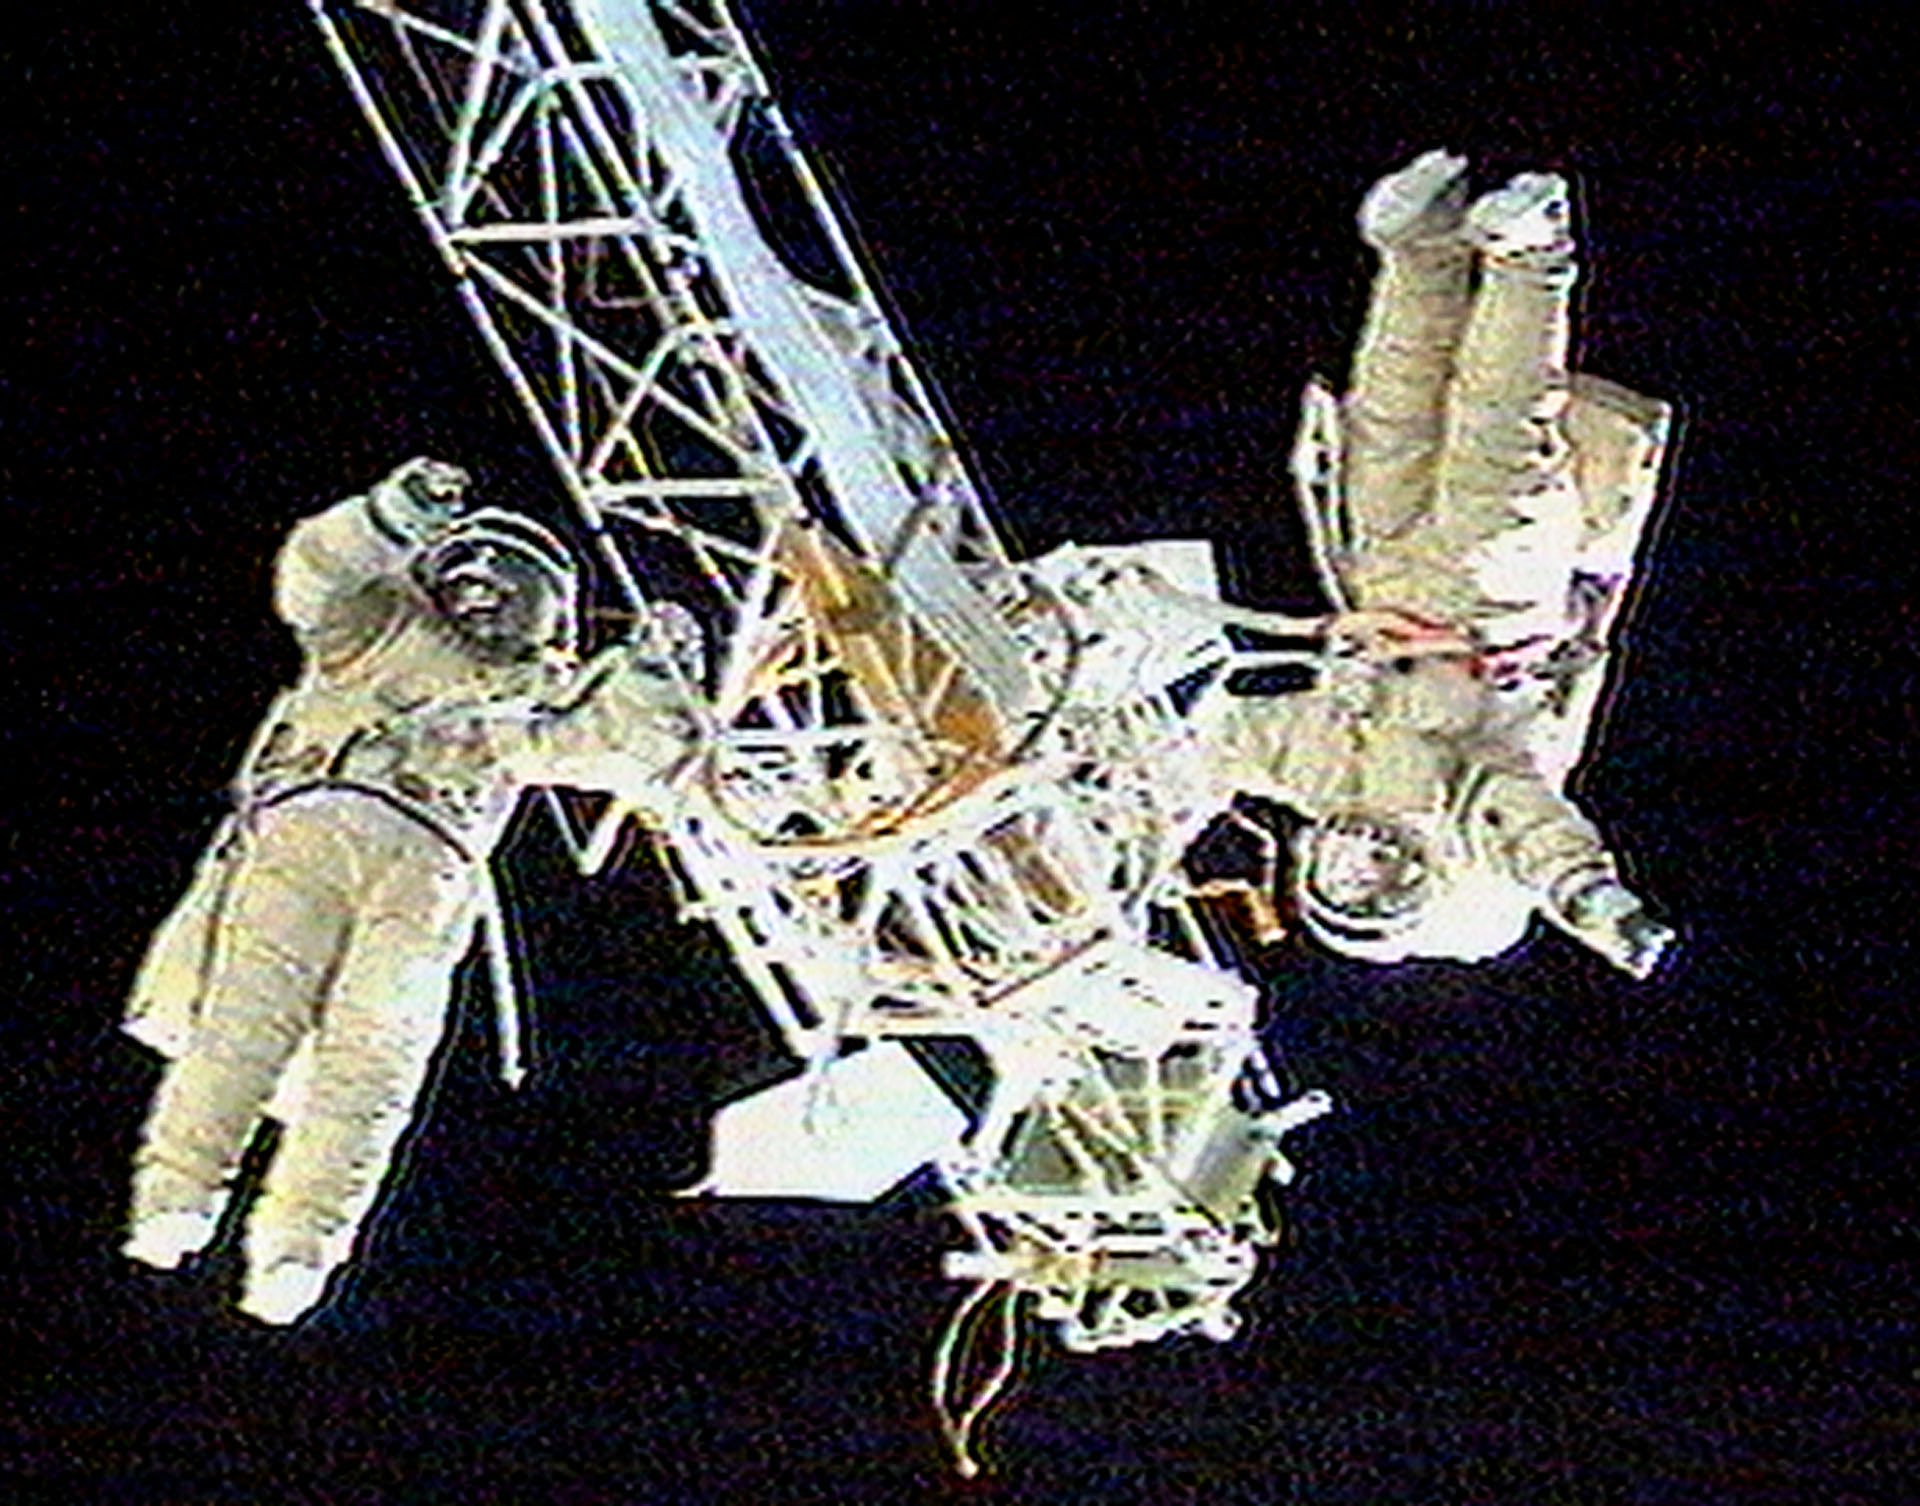 Two Russian cosmonauts hold on to a 14-meter girder after they discarded a faulty thruster engine on April 11, 1998. This was the first of three planned space walks. The cosmonauts tossed a spent thruster engine into space and examined a faulty valve during the spacewalk designed to keep the aging space station running smoothly and pointing toward the sun.